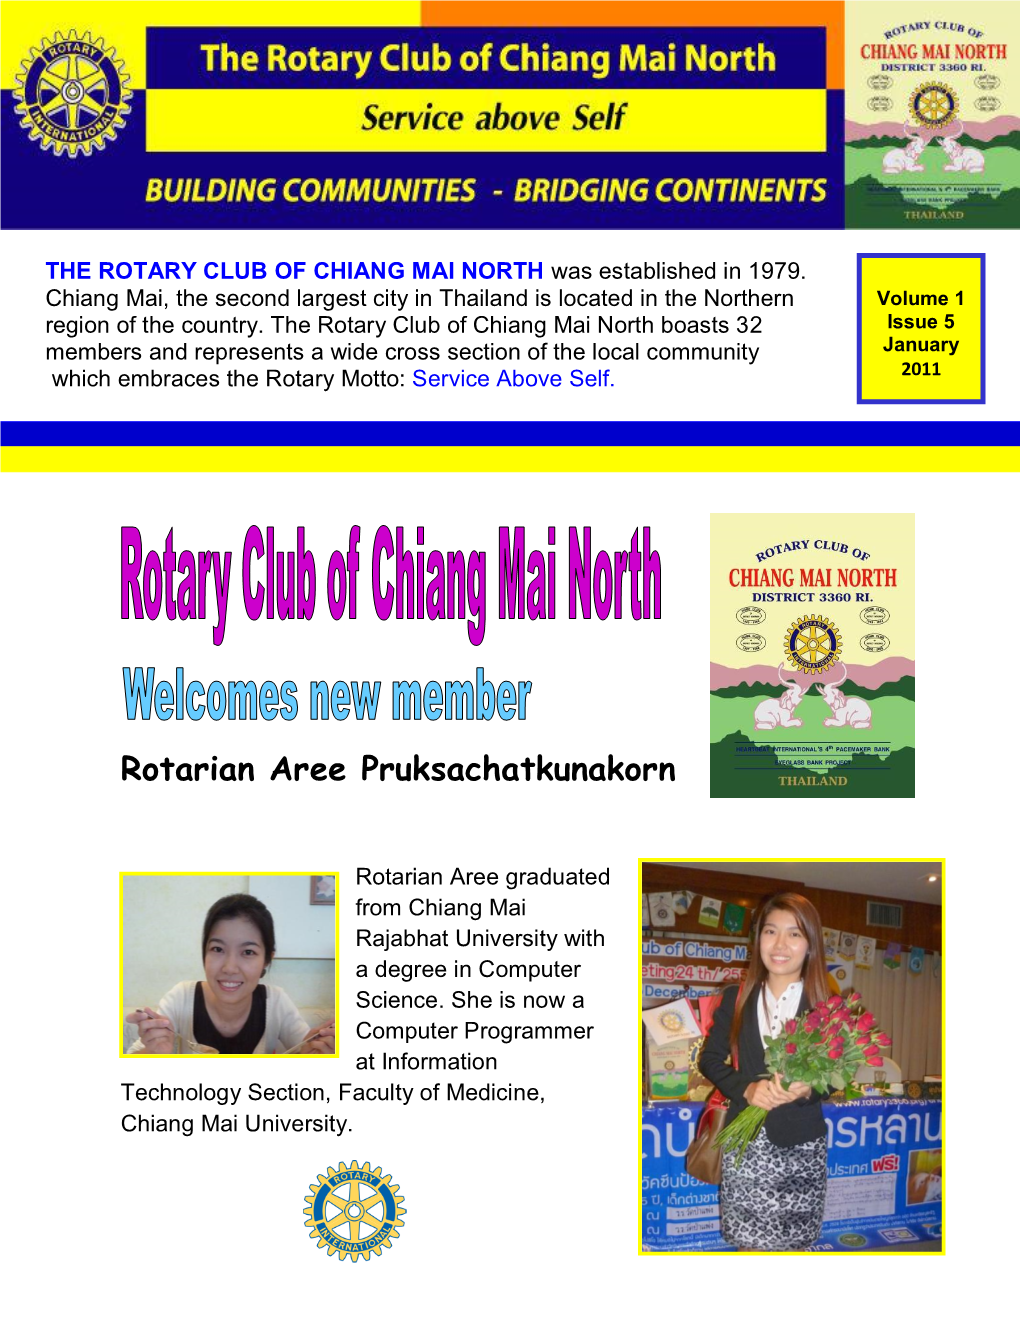 Chiang Mai North Newsletter